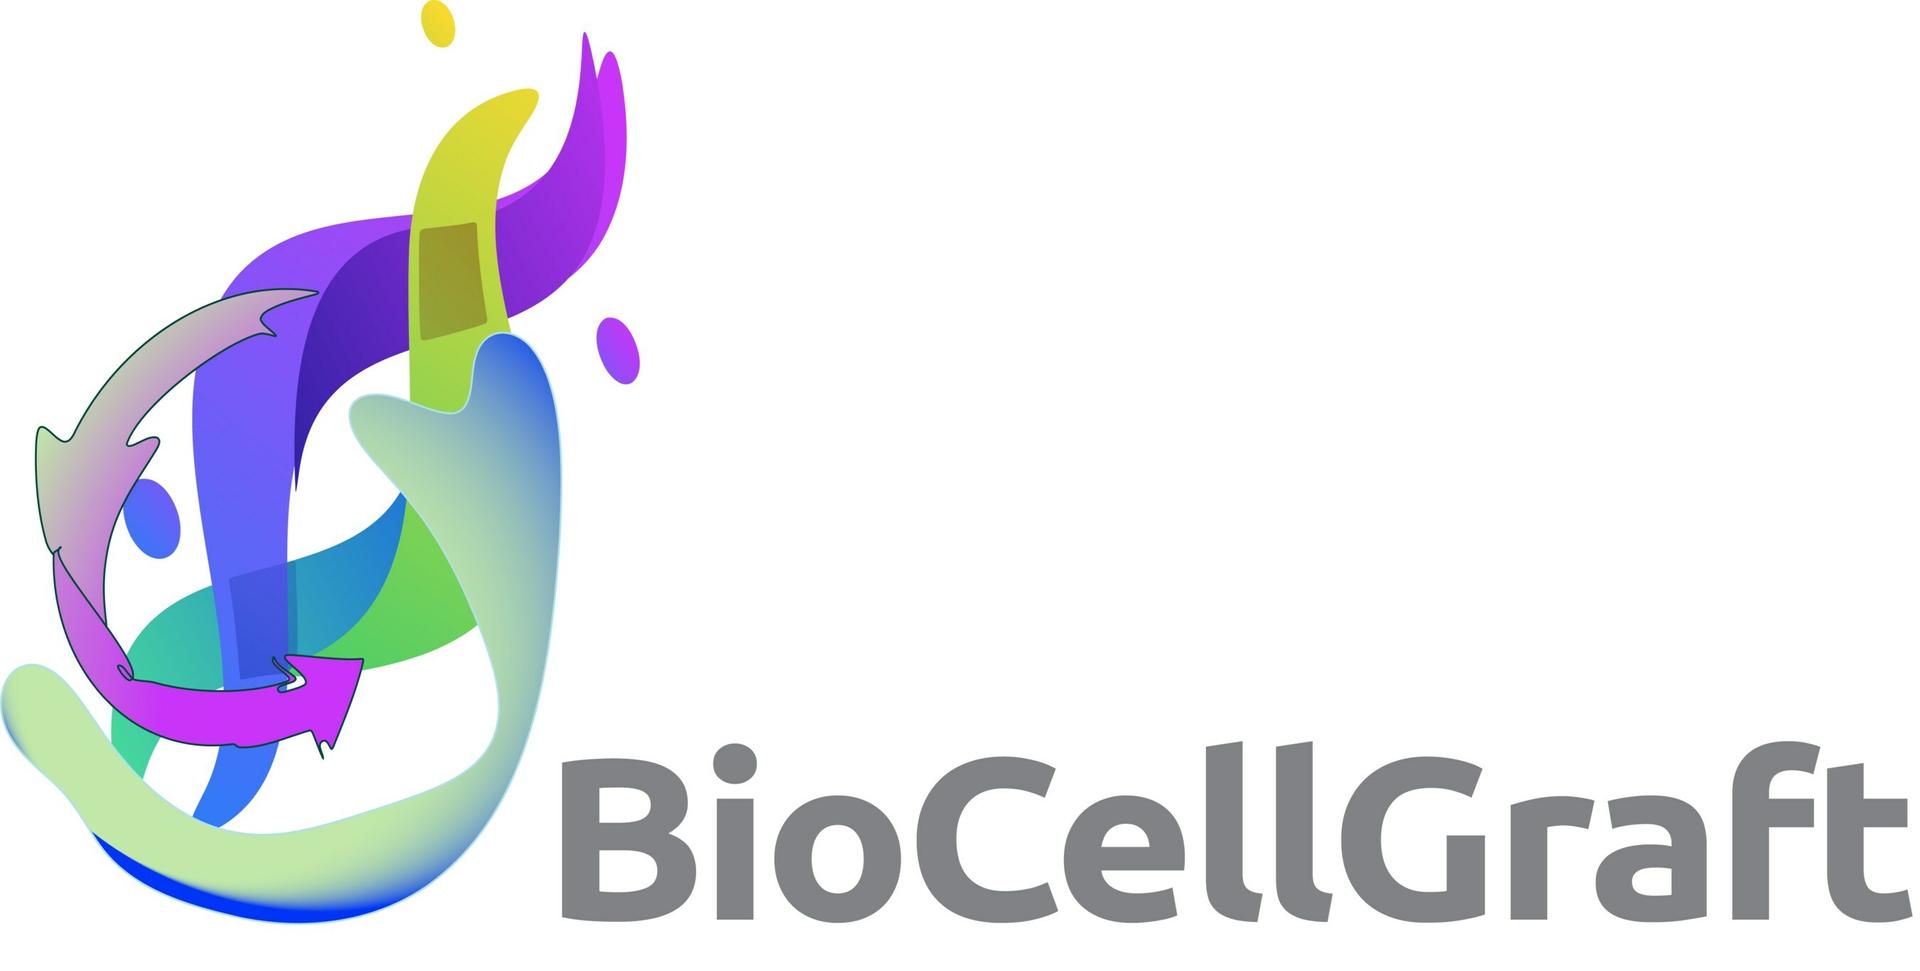 BioCellgraft Finalizes Commercialization Agreement with Celularity For The Manufacture and Distribution of Products for Therapeutic Use in Oral Healthcare